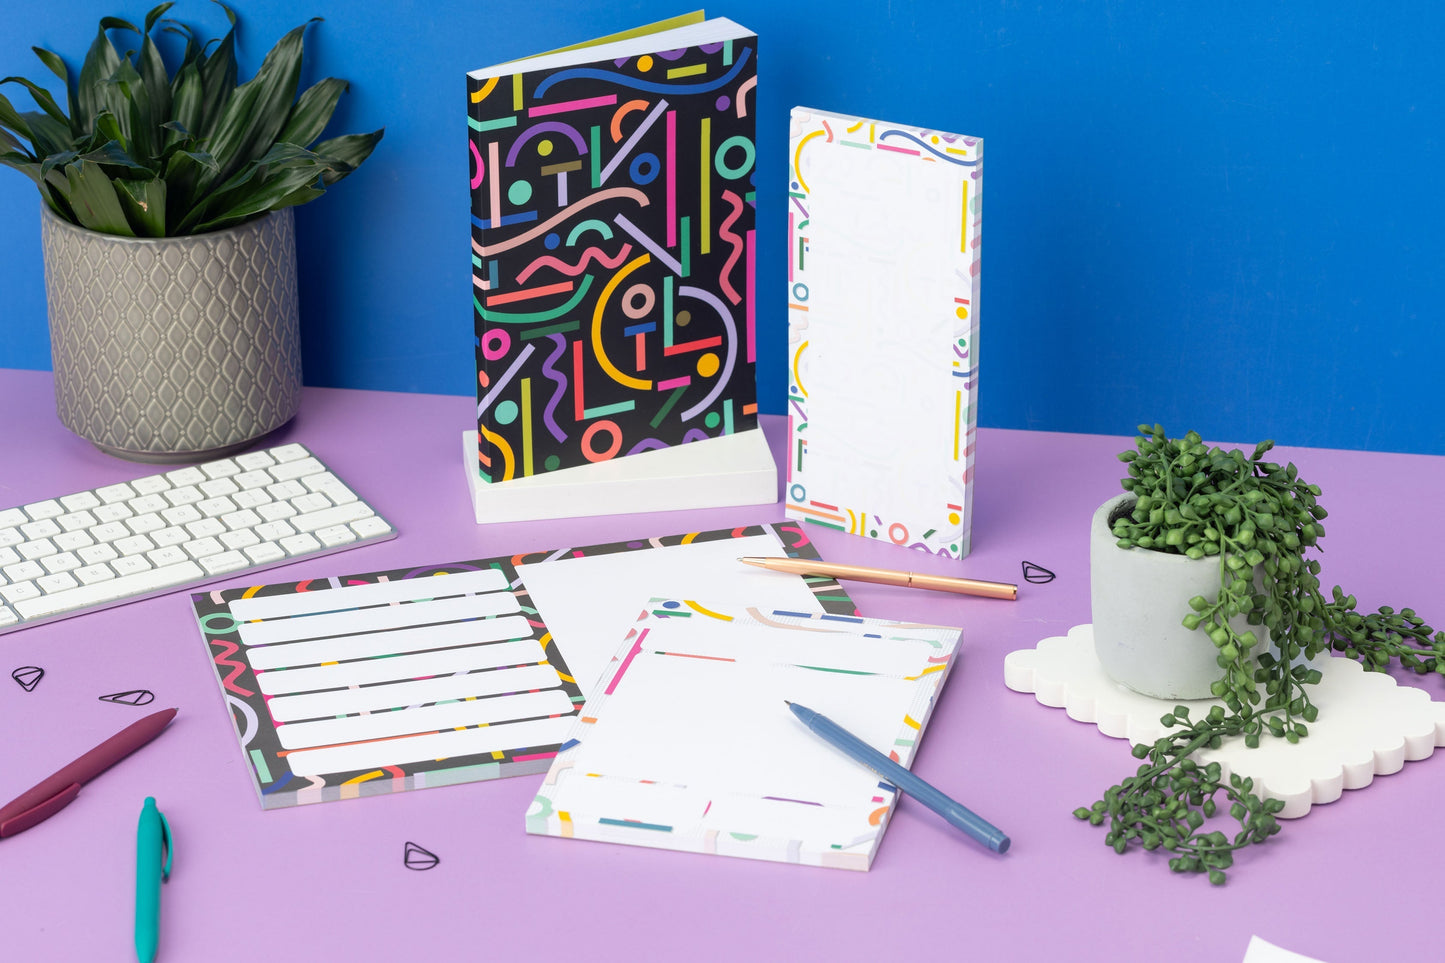 Cutouts Full collection - A4 Planner Pad, A5 Daily Planner Pad, DL List pad and A5 Notebook - are on a lilac desk with small plants, pens and a white keyboard around them.  The DL pad is upright, and the A5 Notebook is on a white plinth.  There is a blue wall behind.